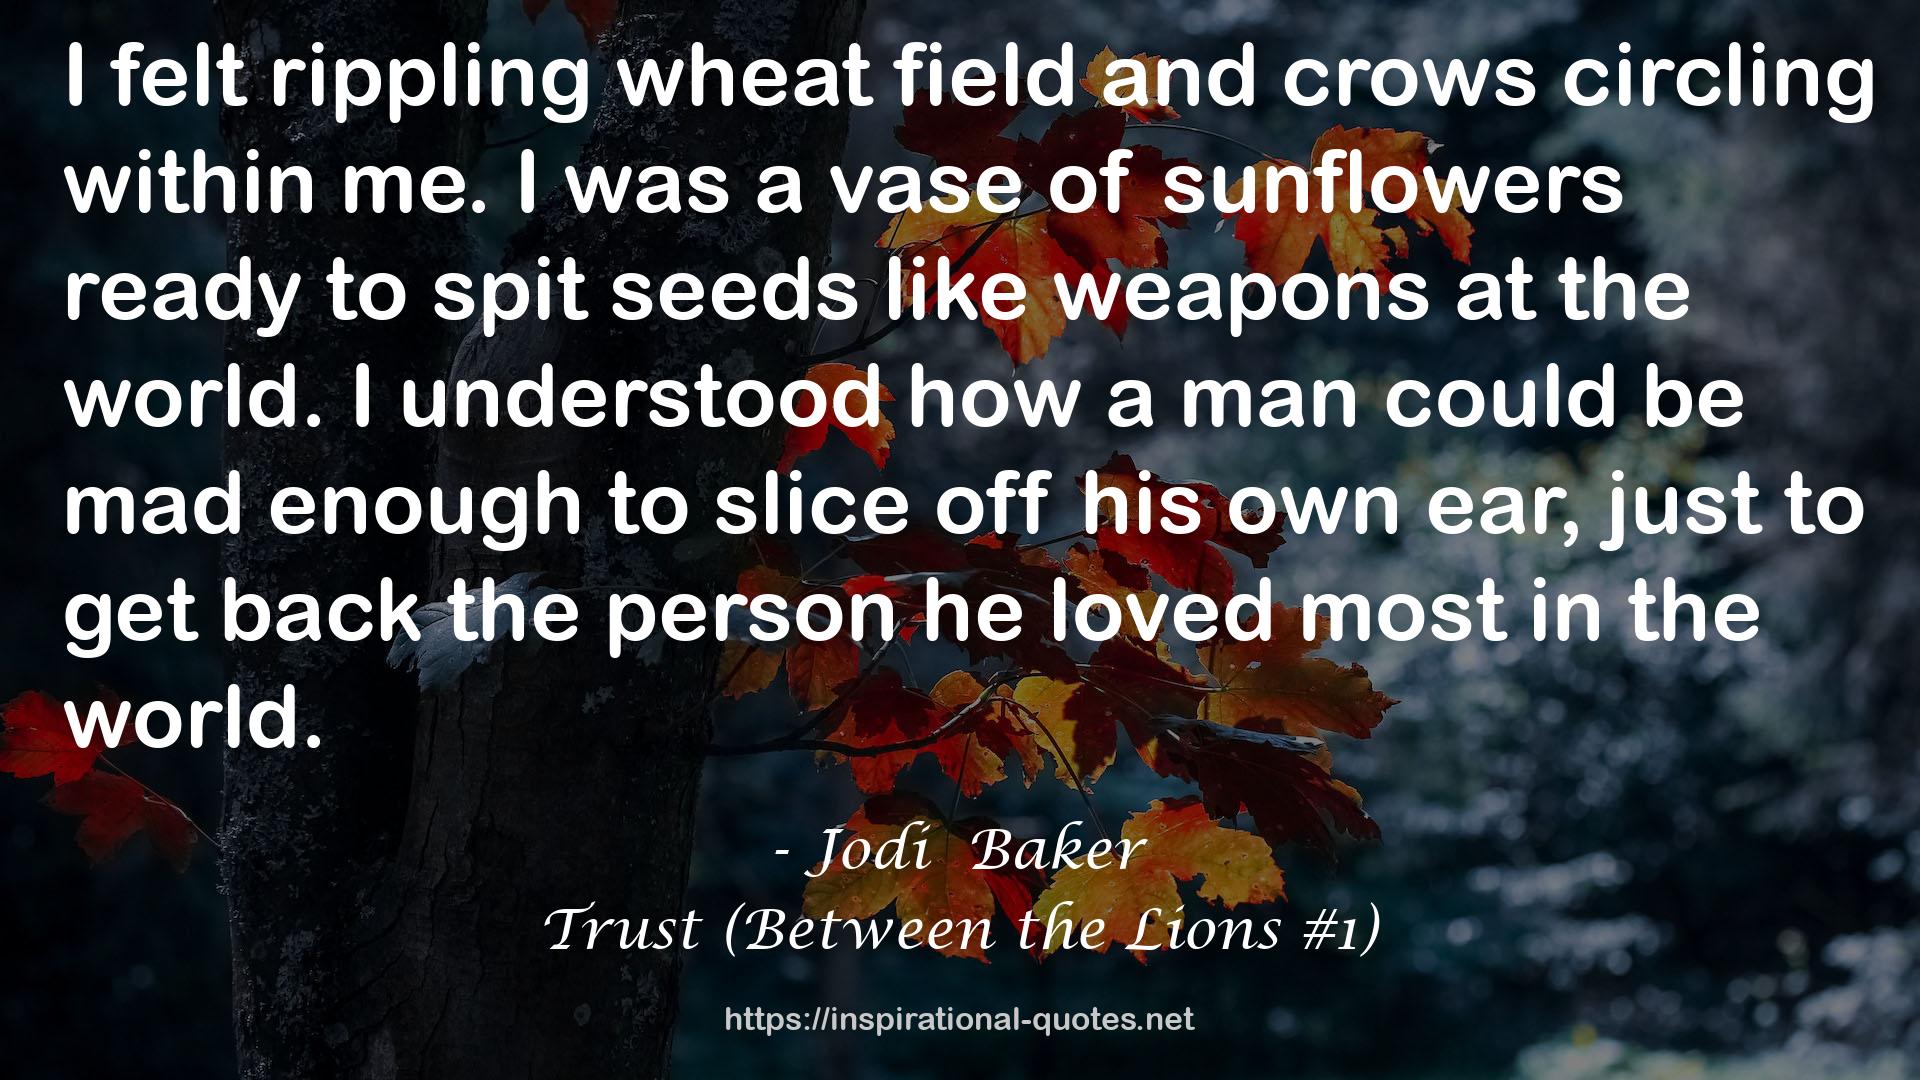 Trust (Between the Lions #1) QUOTES